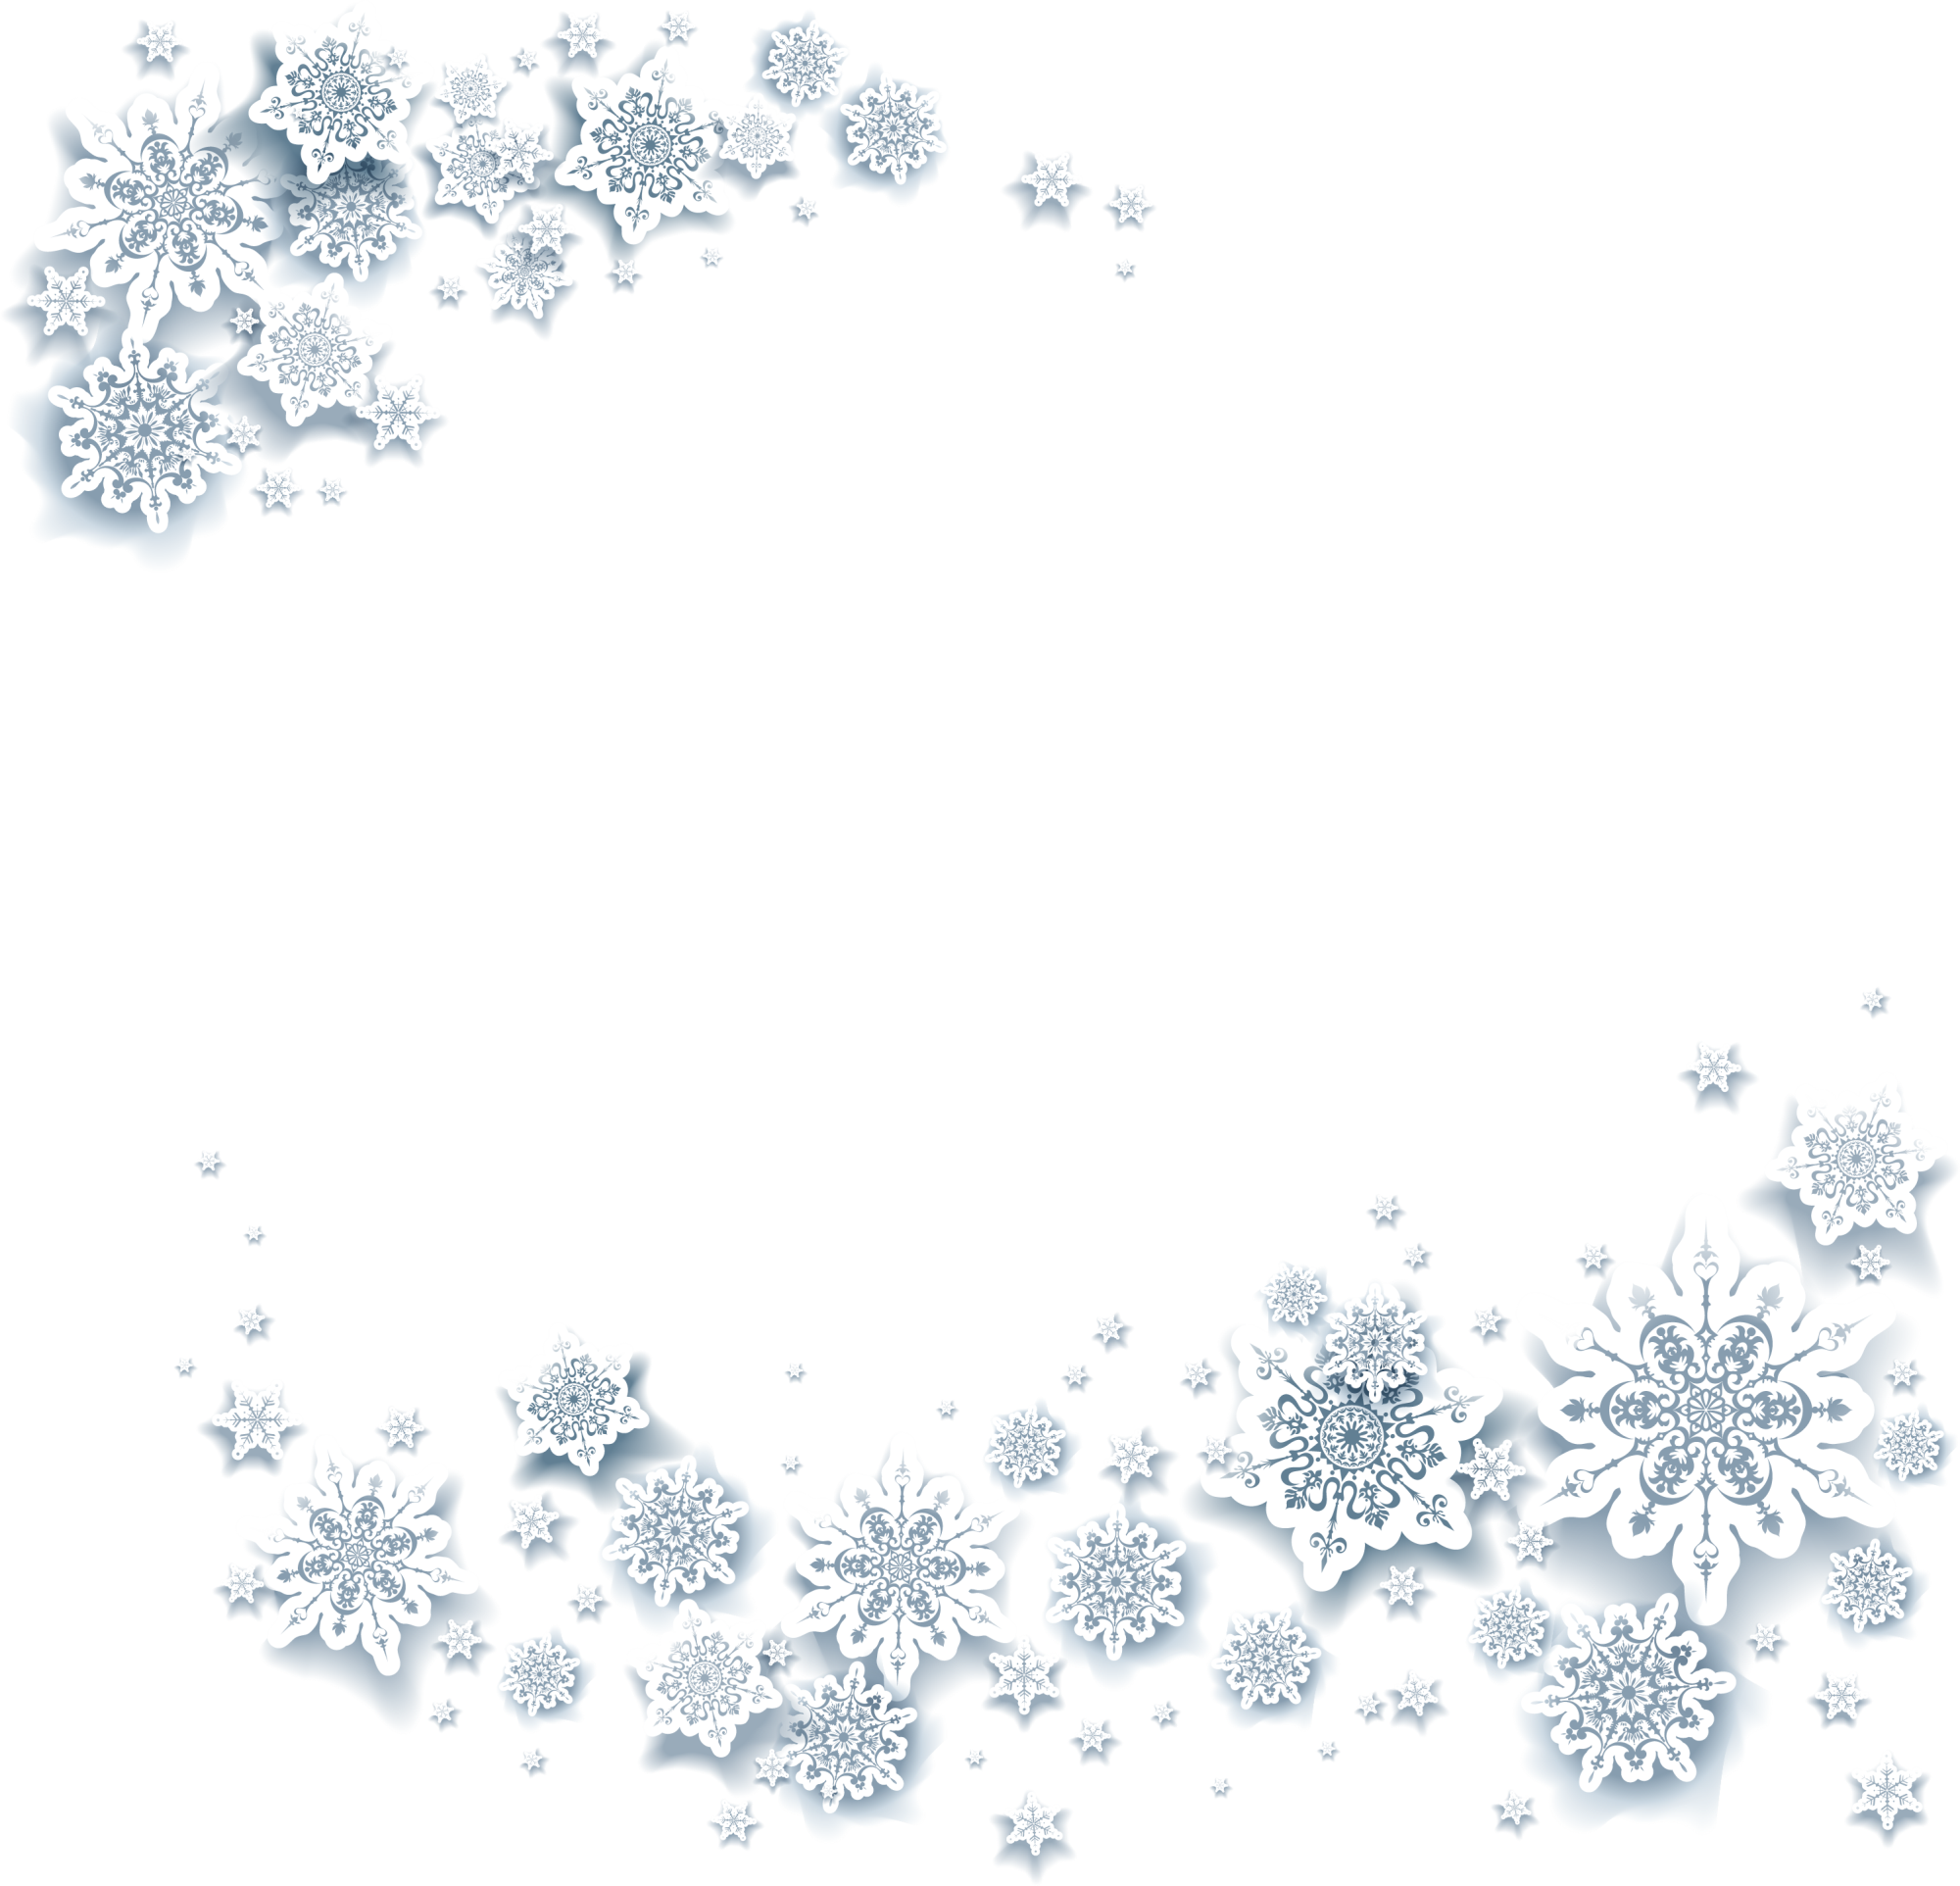 Crystal White Snowflake Ice Snow HQ Image Free PNG Clipart